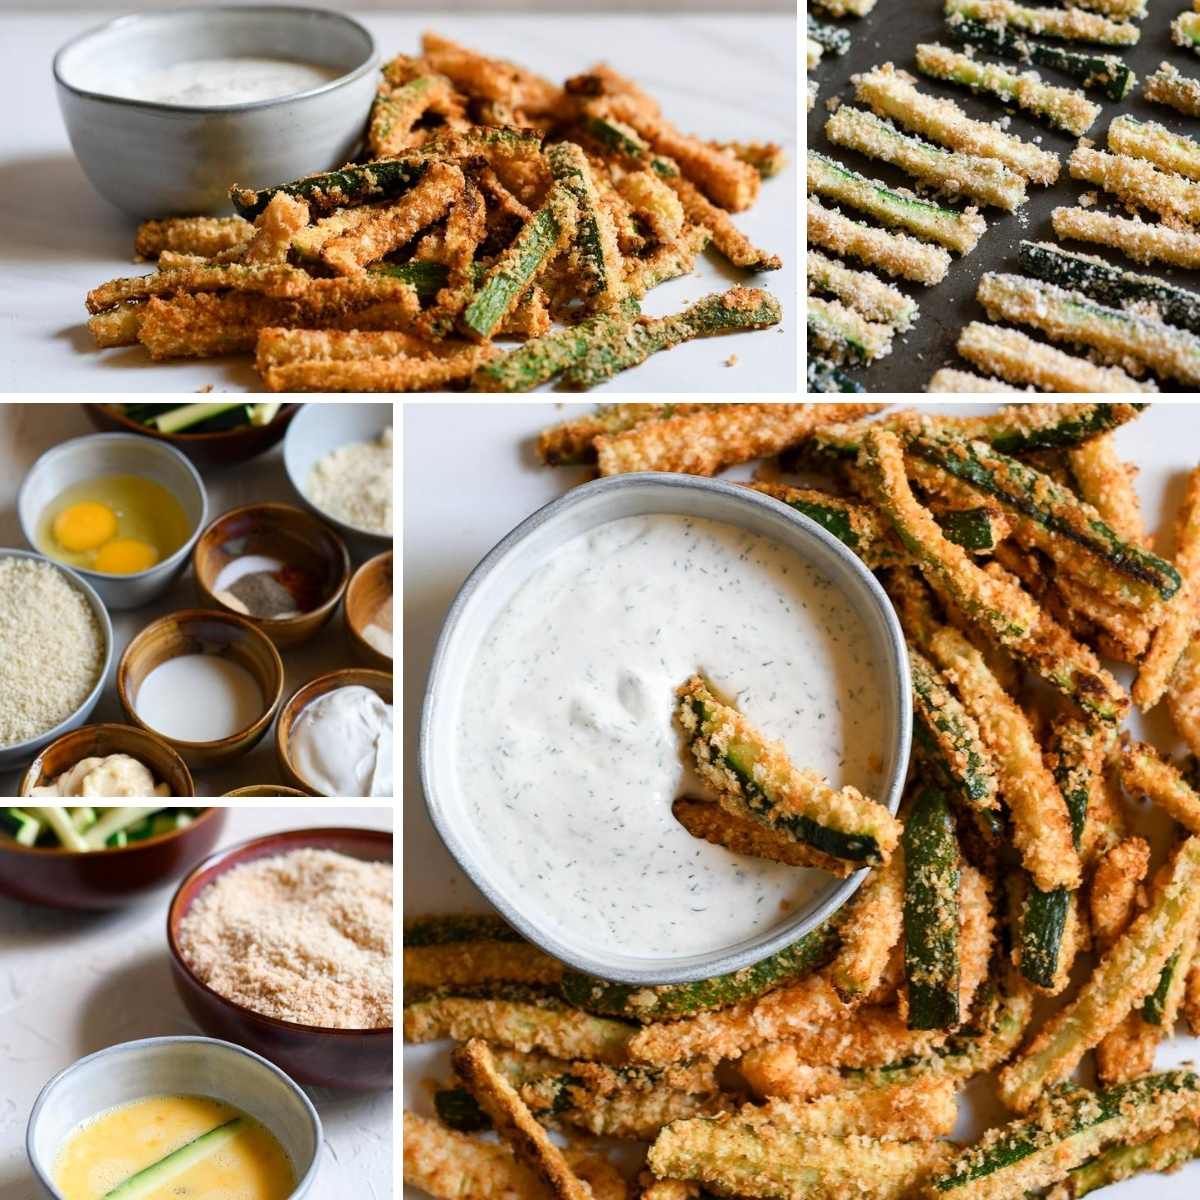 collage of images showing how to make zucchini fries